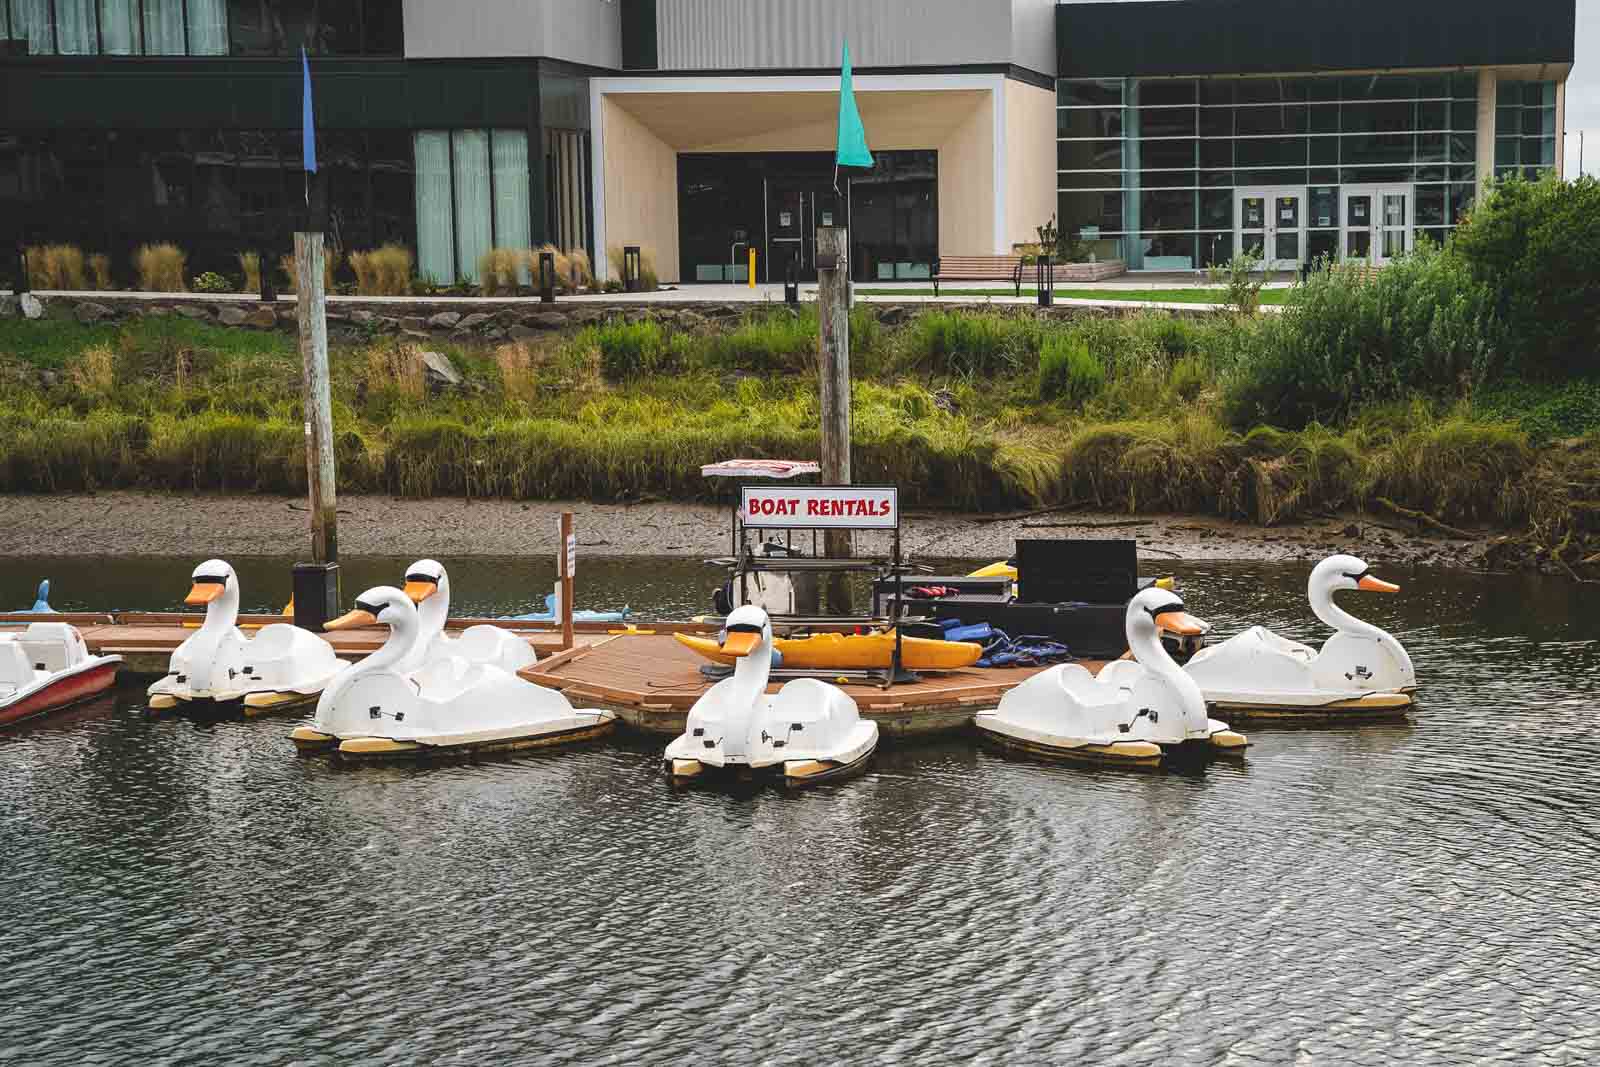 Swan boats on the canal in Seaside - one of the best places to visit near Cannon Beach.